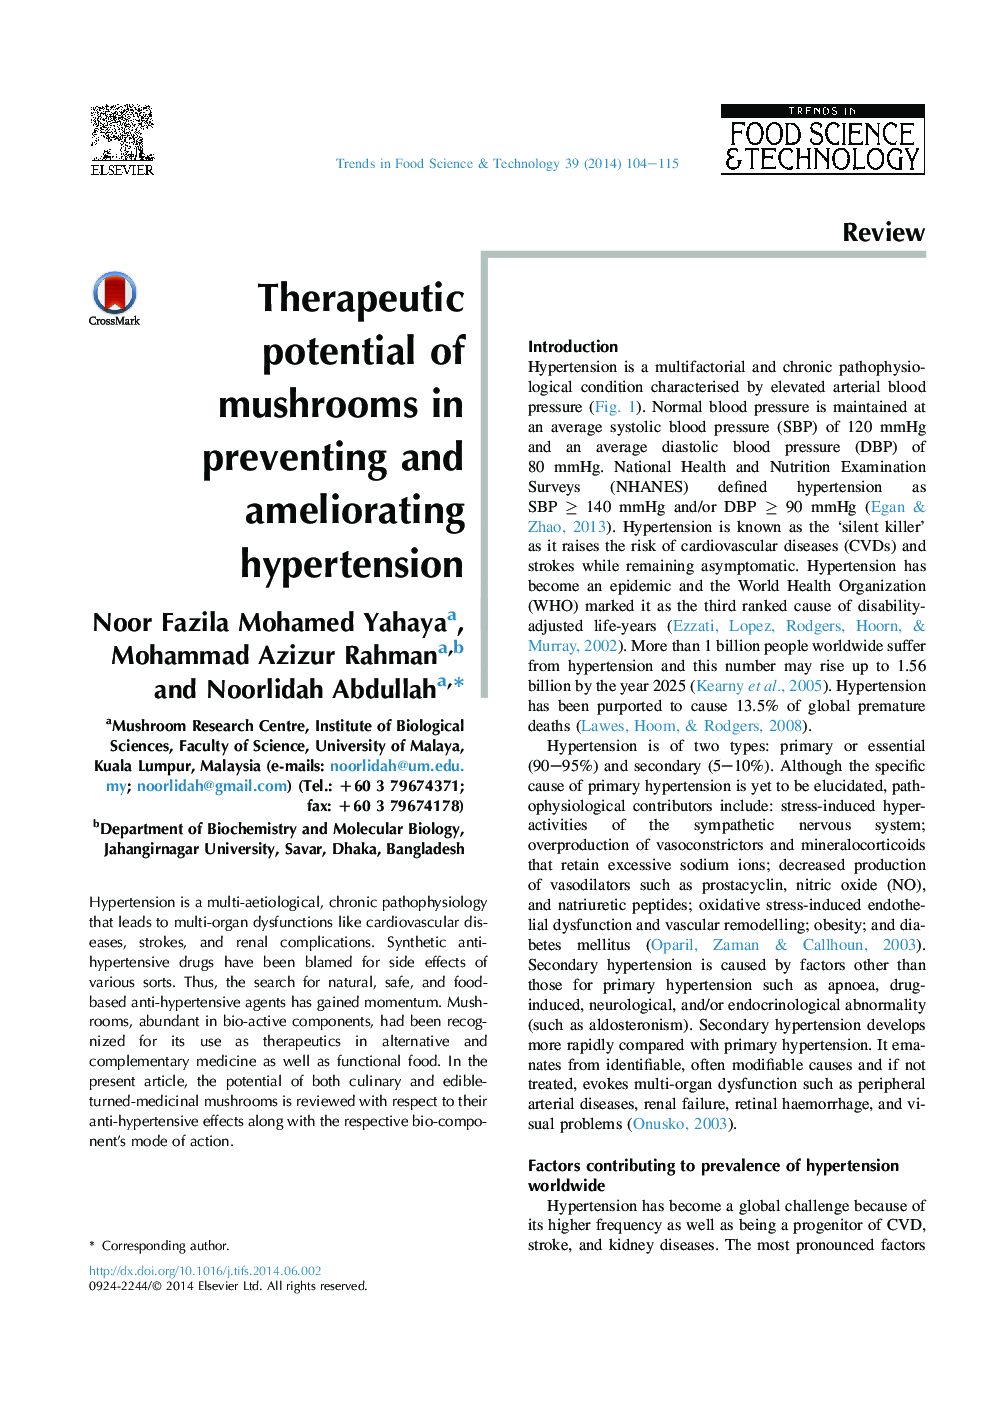 Therapeutic potential of mushrooms in preventing and ameliorating hypertension